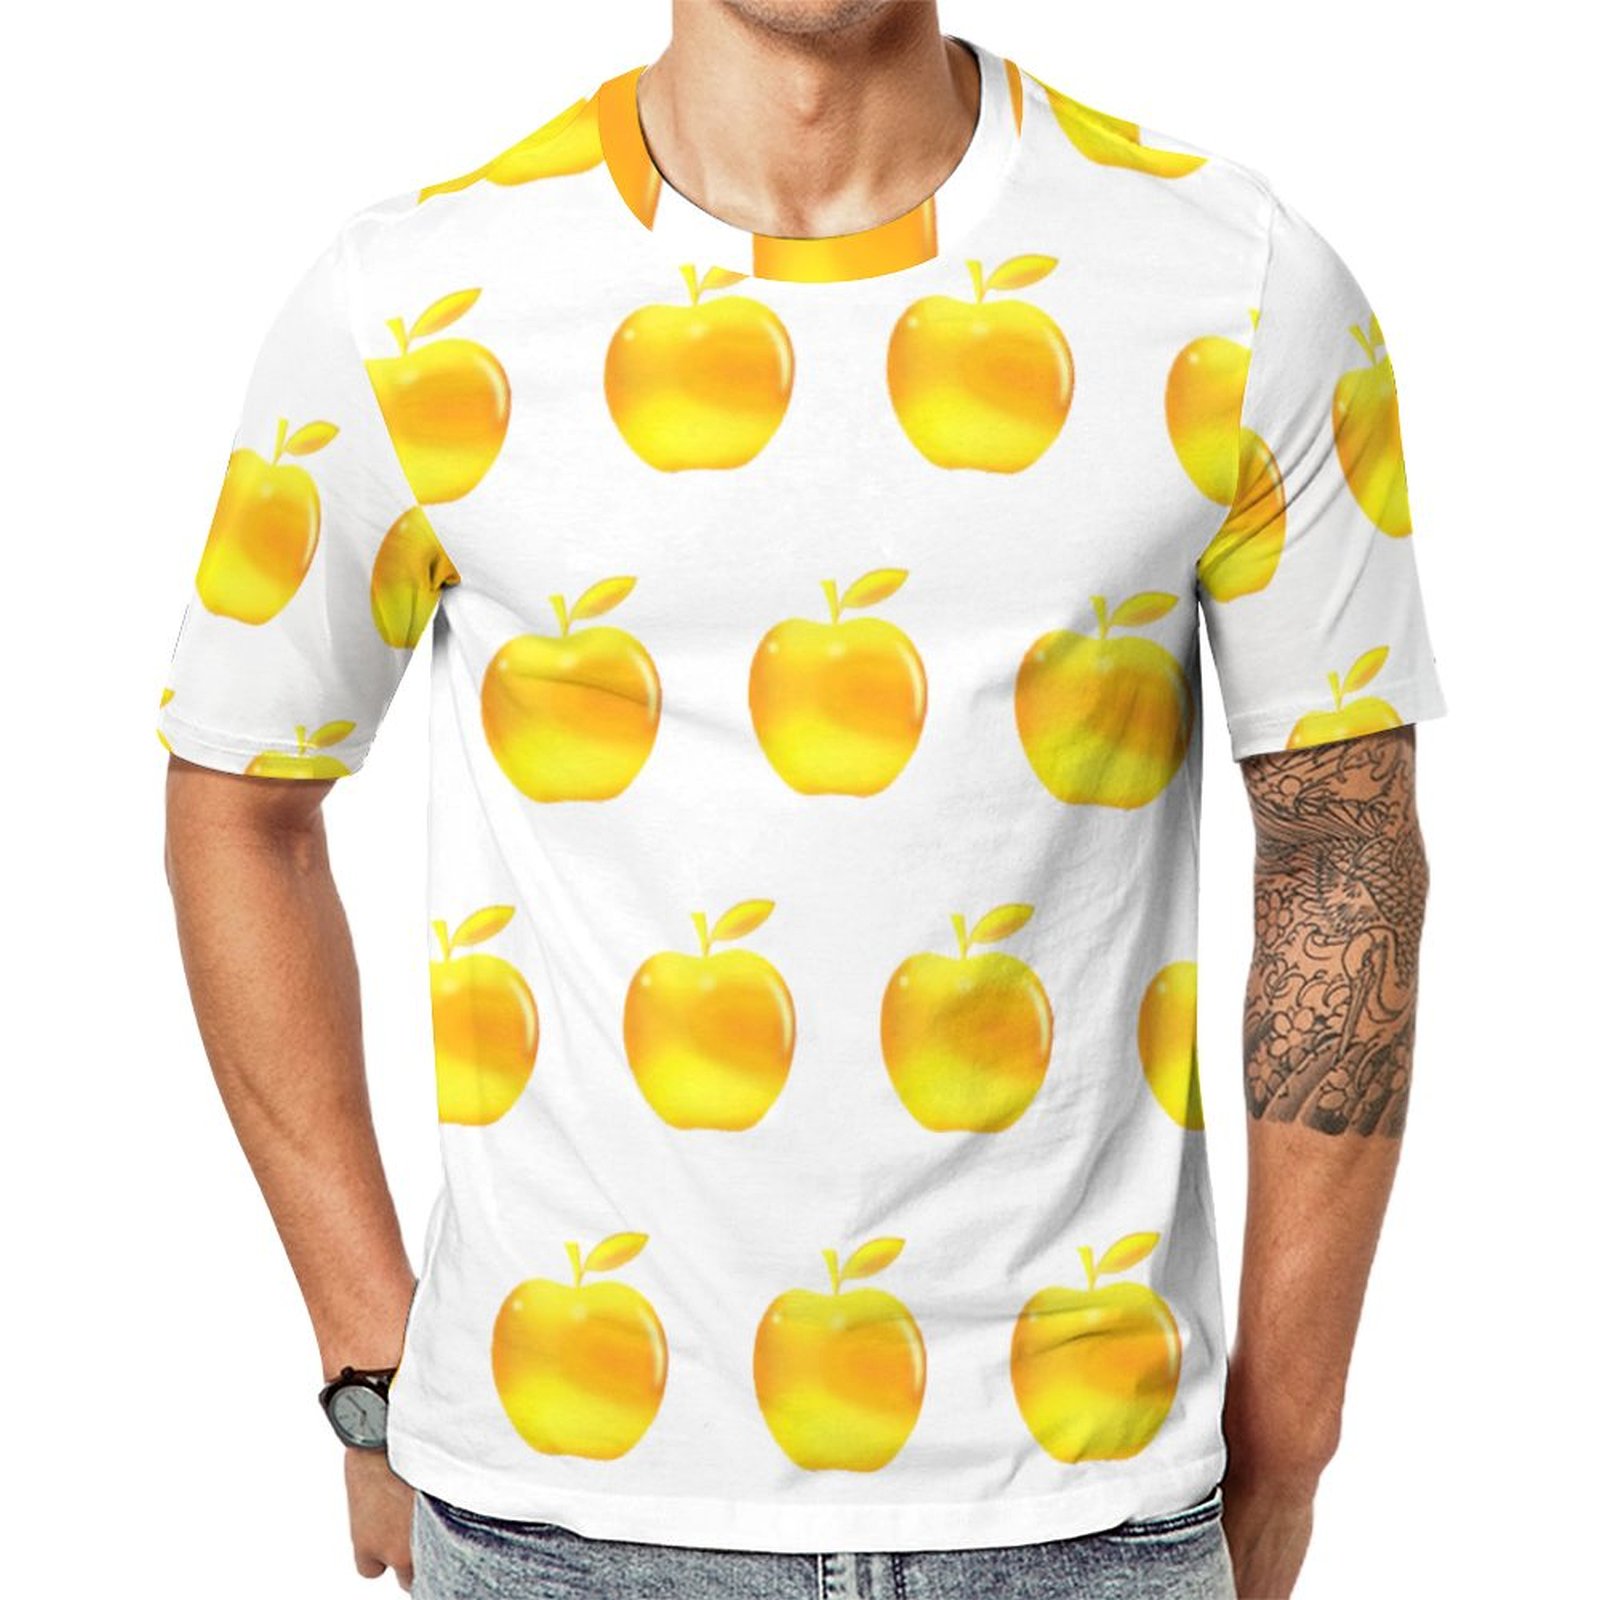 Golden White Apple Short Sleeve Print Unisex Tshirt Summer Casual Tees for Men and Women Coolcoshirts